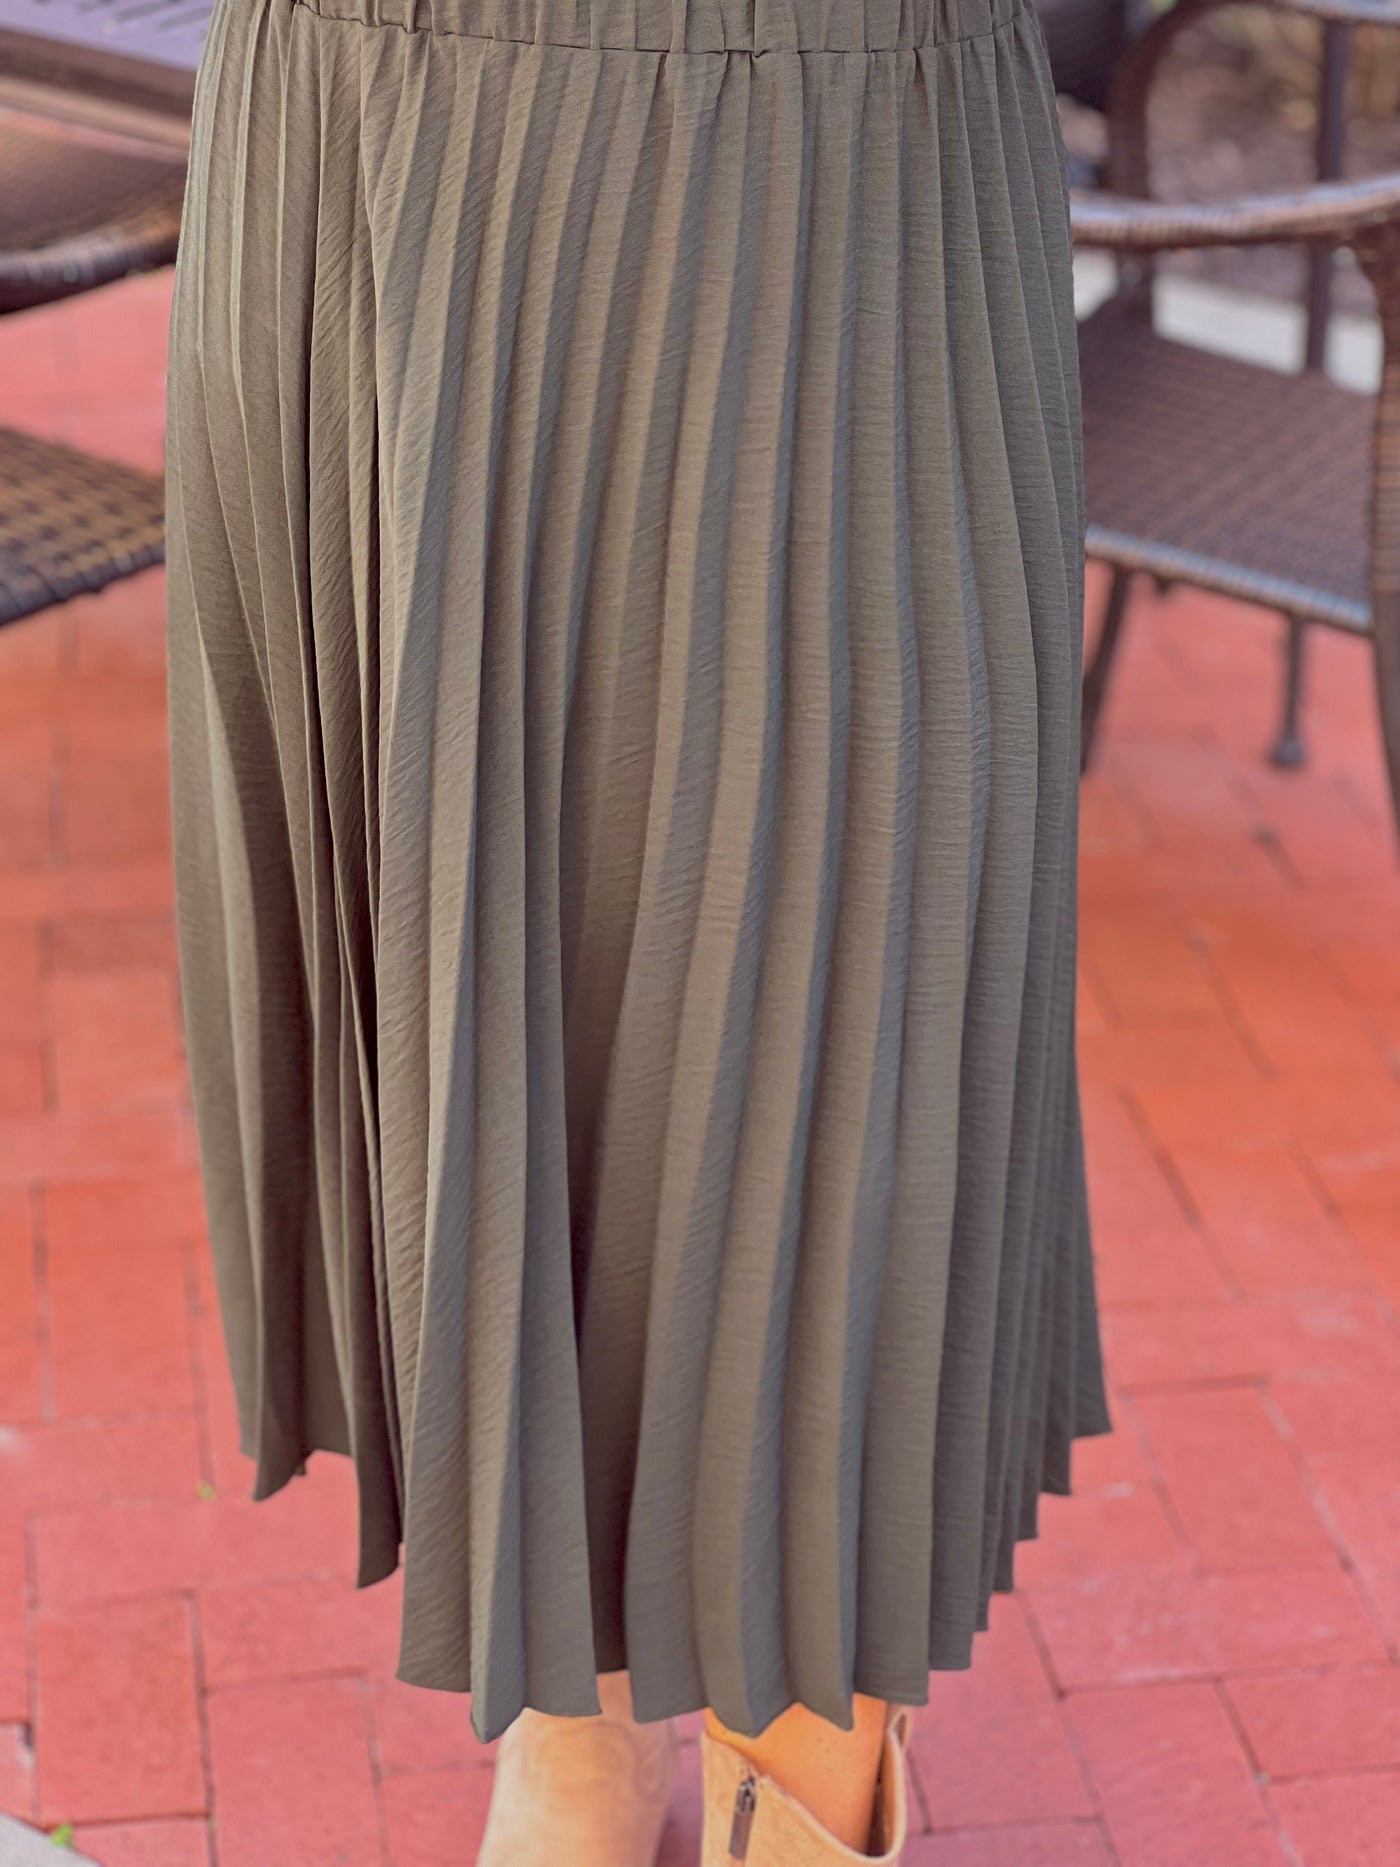 Pleated Skirt - 2 Color Options